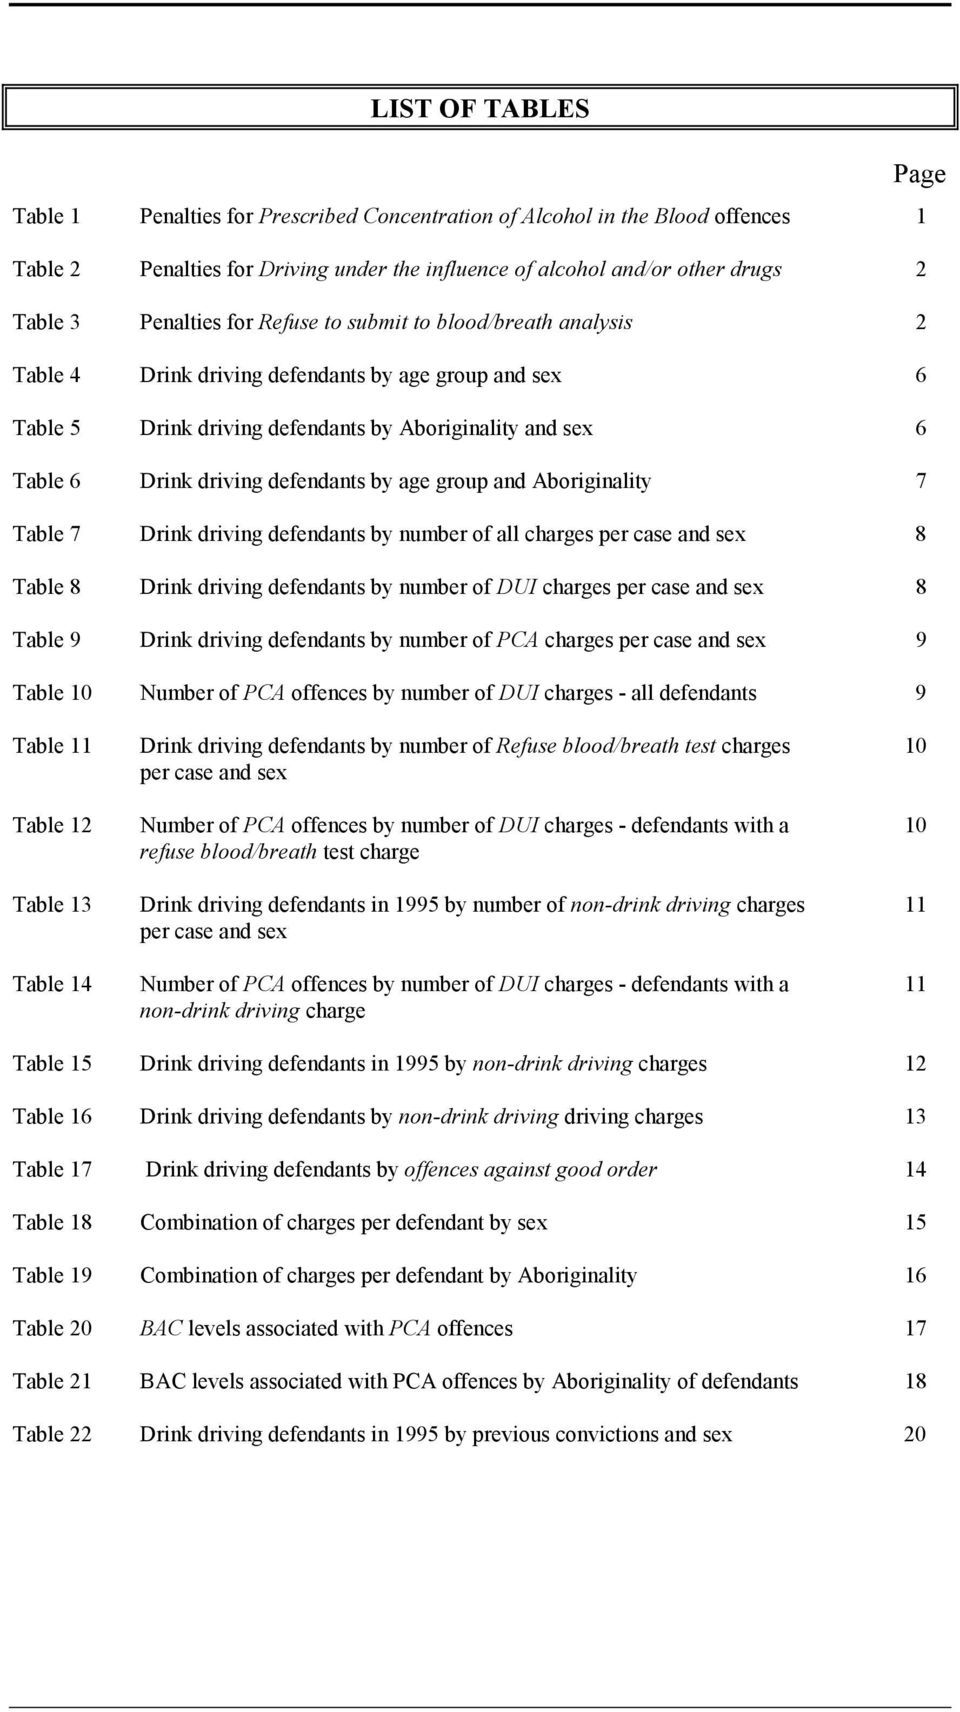 defendants by age group and Aboriginality 7 Table 7 Drink driving defendants by number of all charges per case and sex 8 Table 8 Drink driving defendants by number of DUI charges per case and sex 8